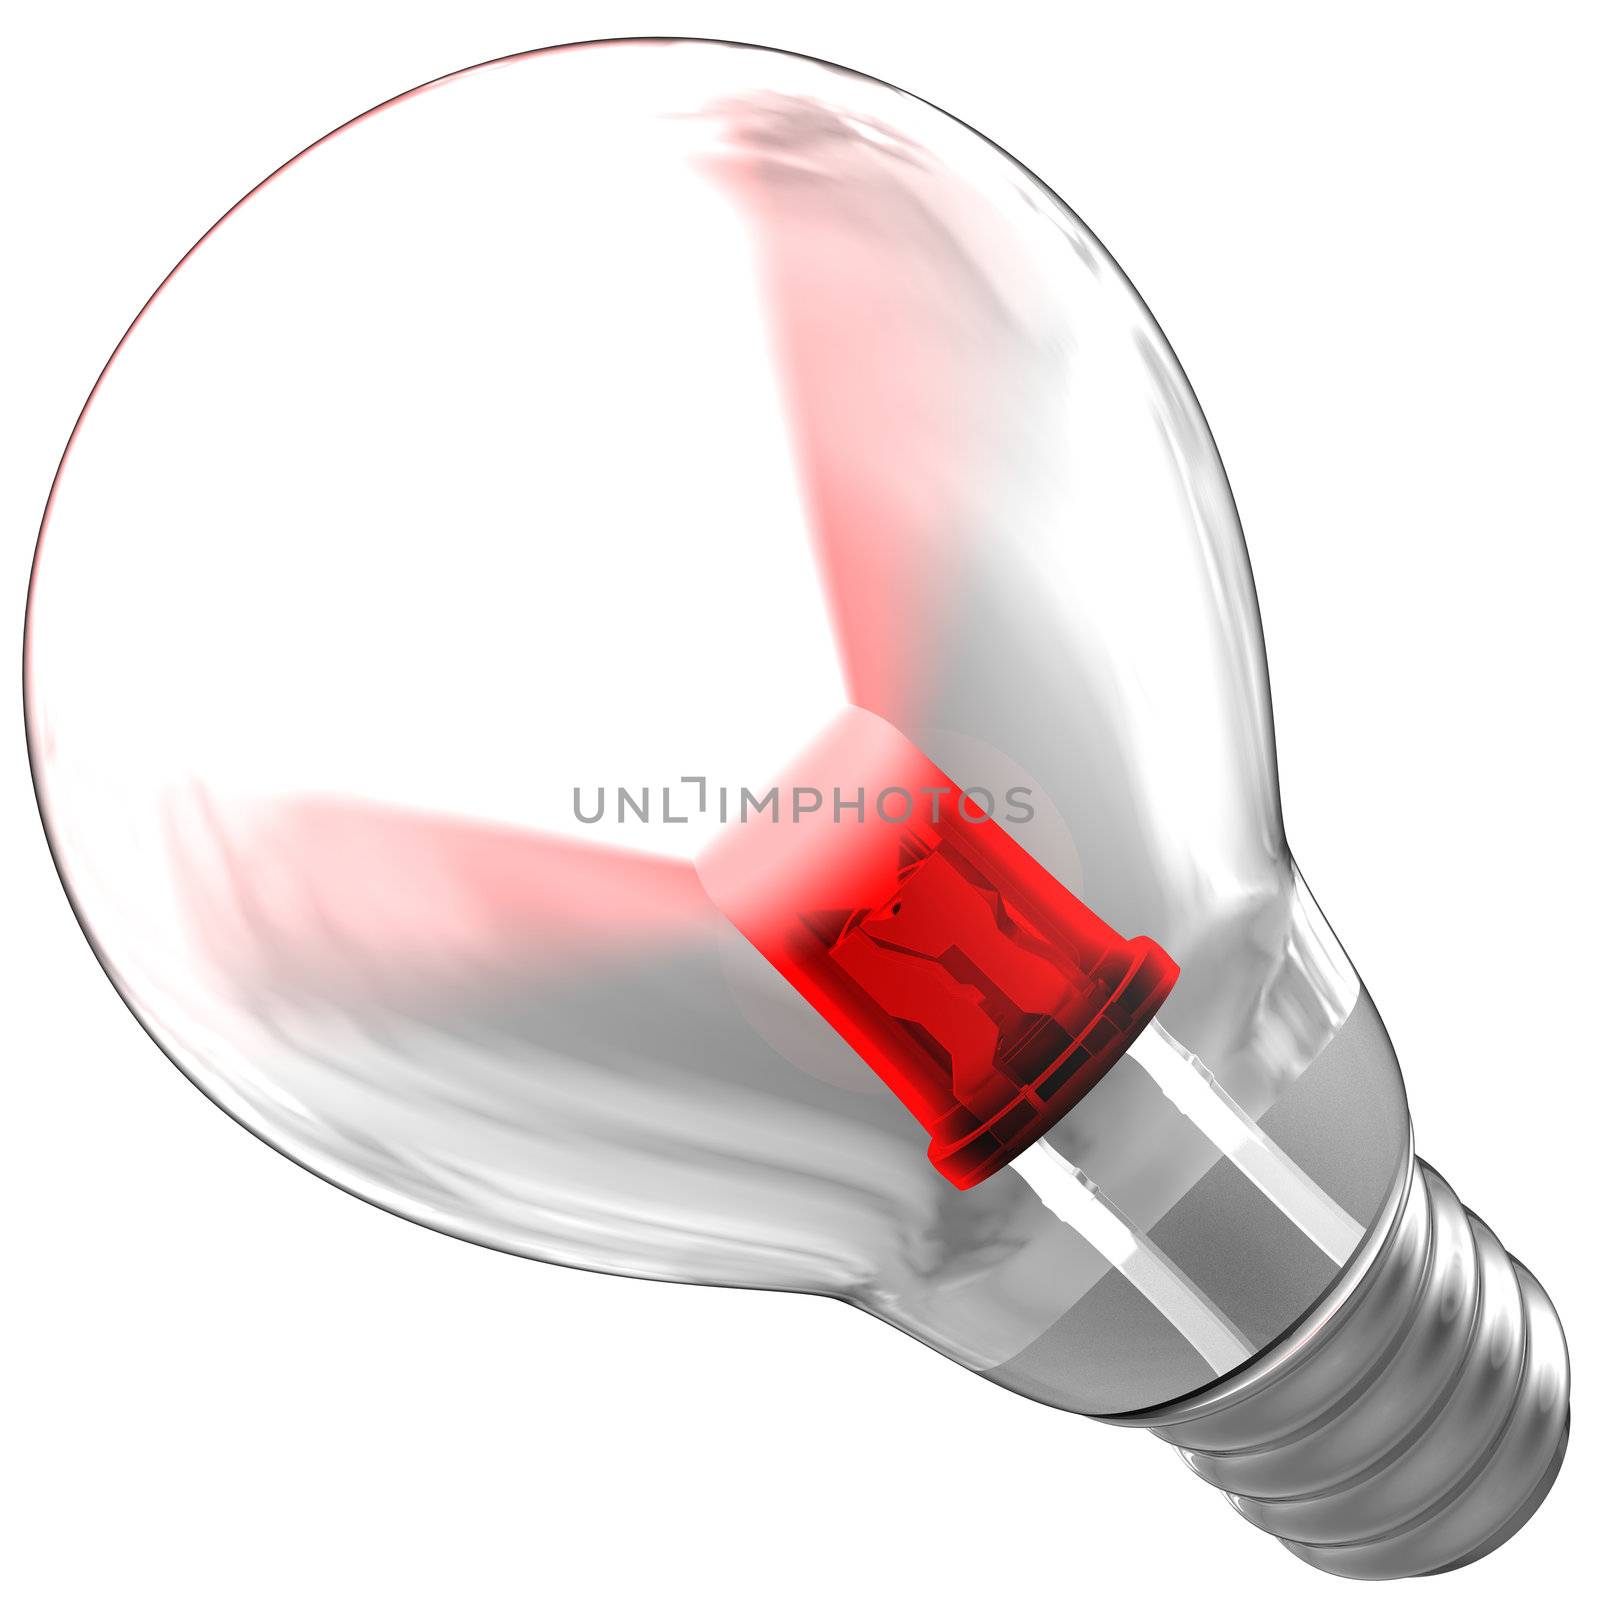 Light bulb composed by a red LED by ytjo